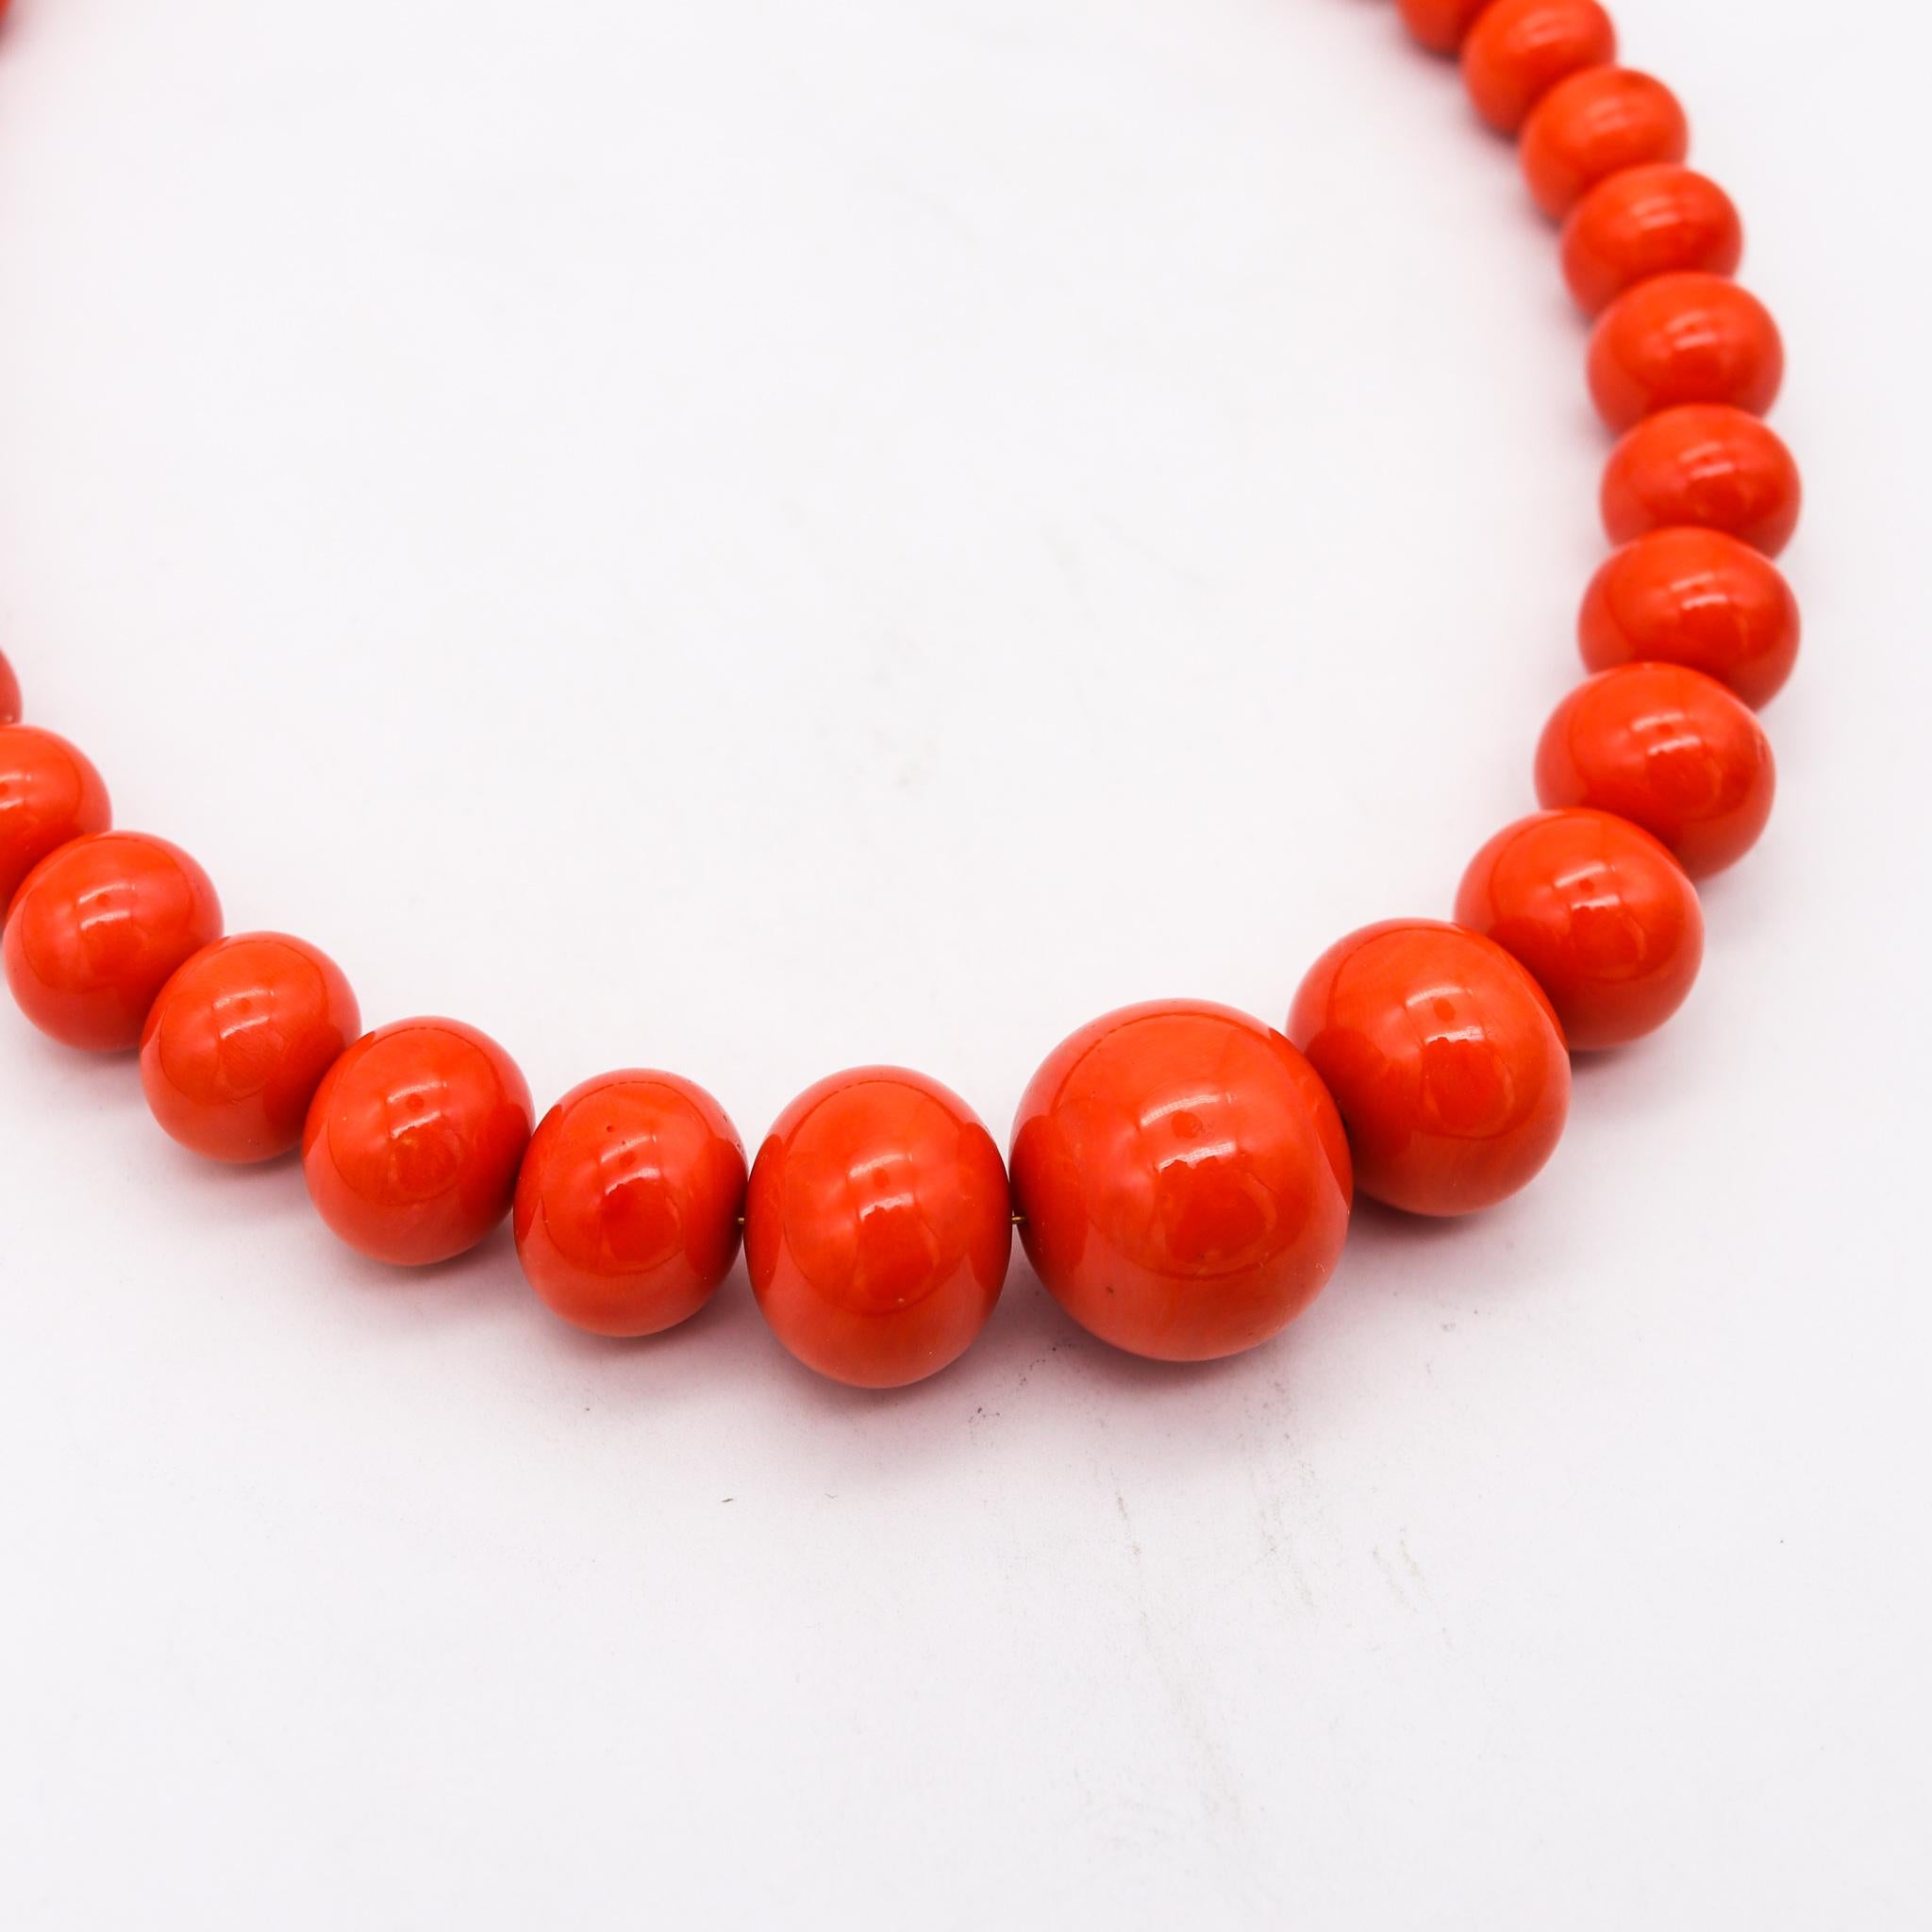 Cabochon Mid Century 1950 Graduated Coral Large Beads Necklace Mount In 18Kt Yellow Gold